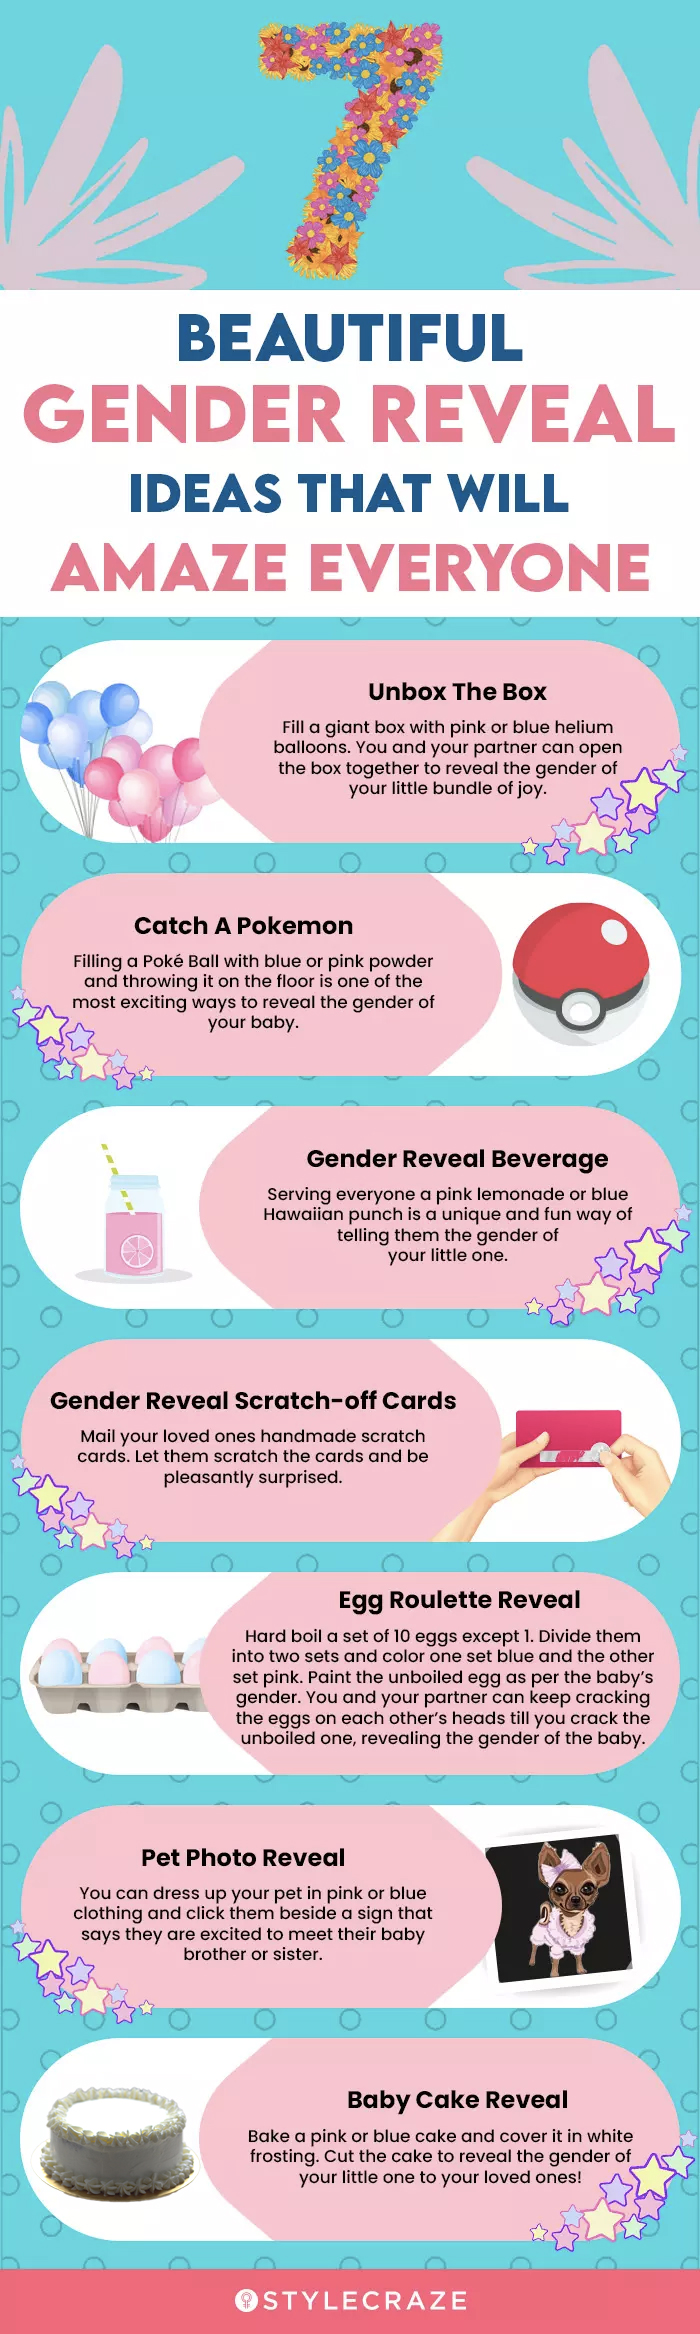 7 beautiful gender reveal ideas that will amaze everyone (infographic)